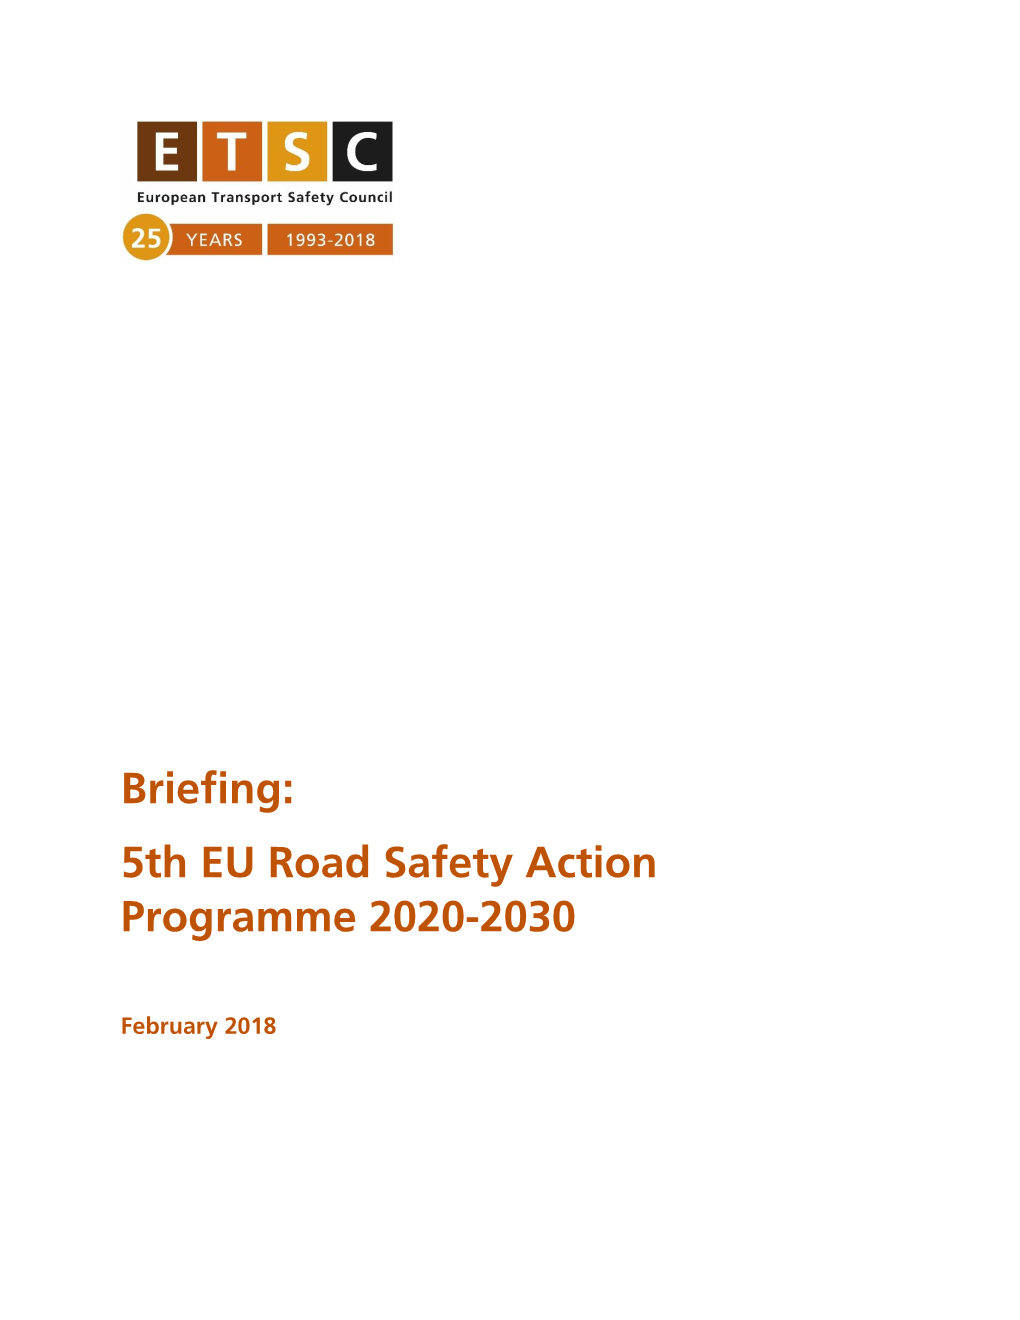 Briefing: 5Th EU Road Safety Action Programme 2020-2030